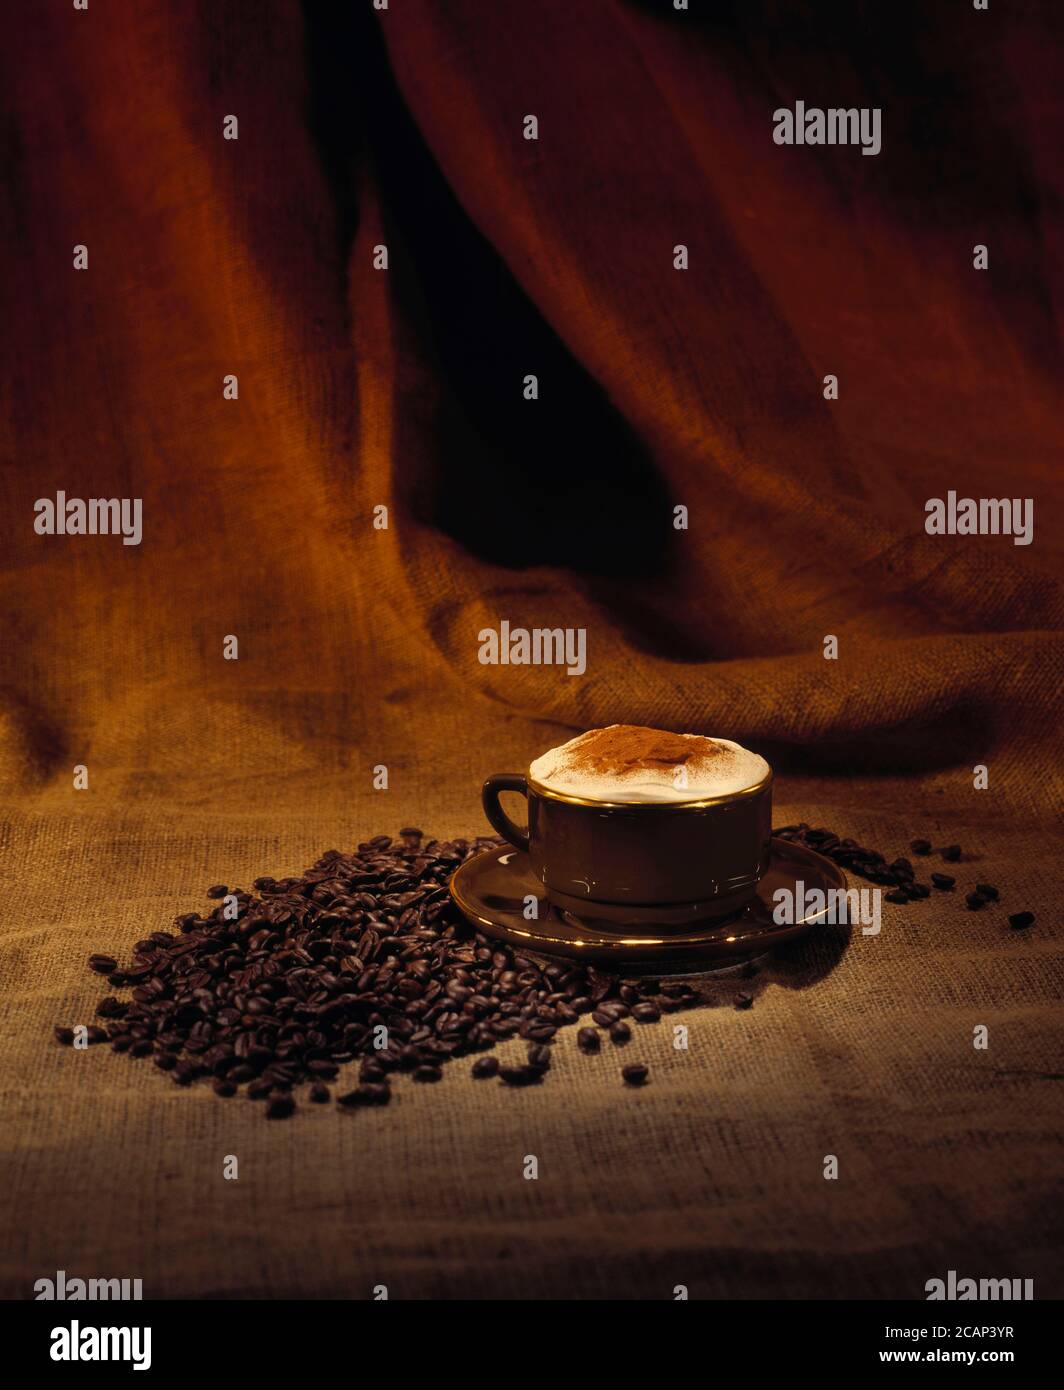 Cappuccino coffee in a brown cup with gold rim on a brown hessian background with whole coffee beans space for caption portrait format Stock Photo